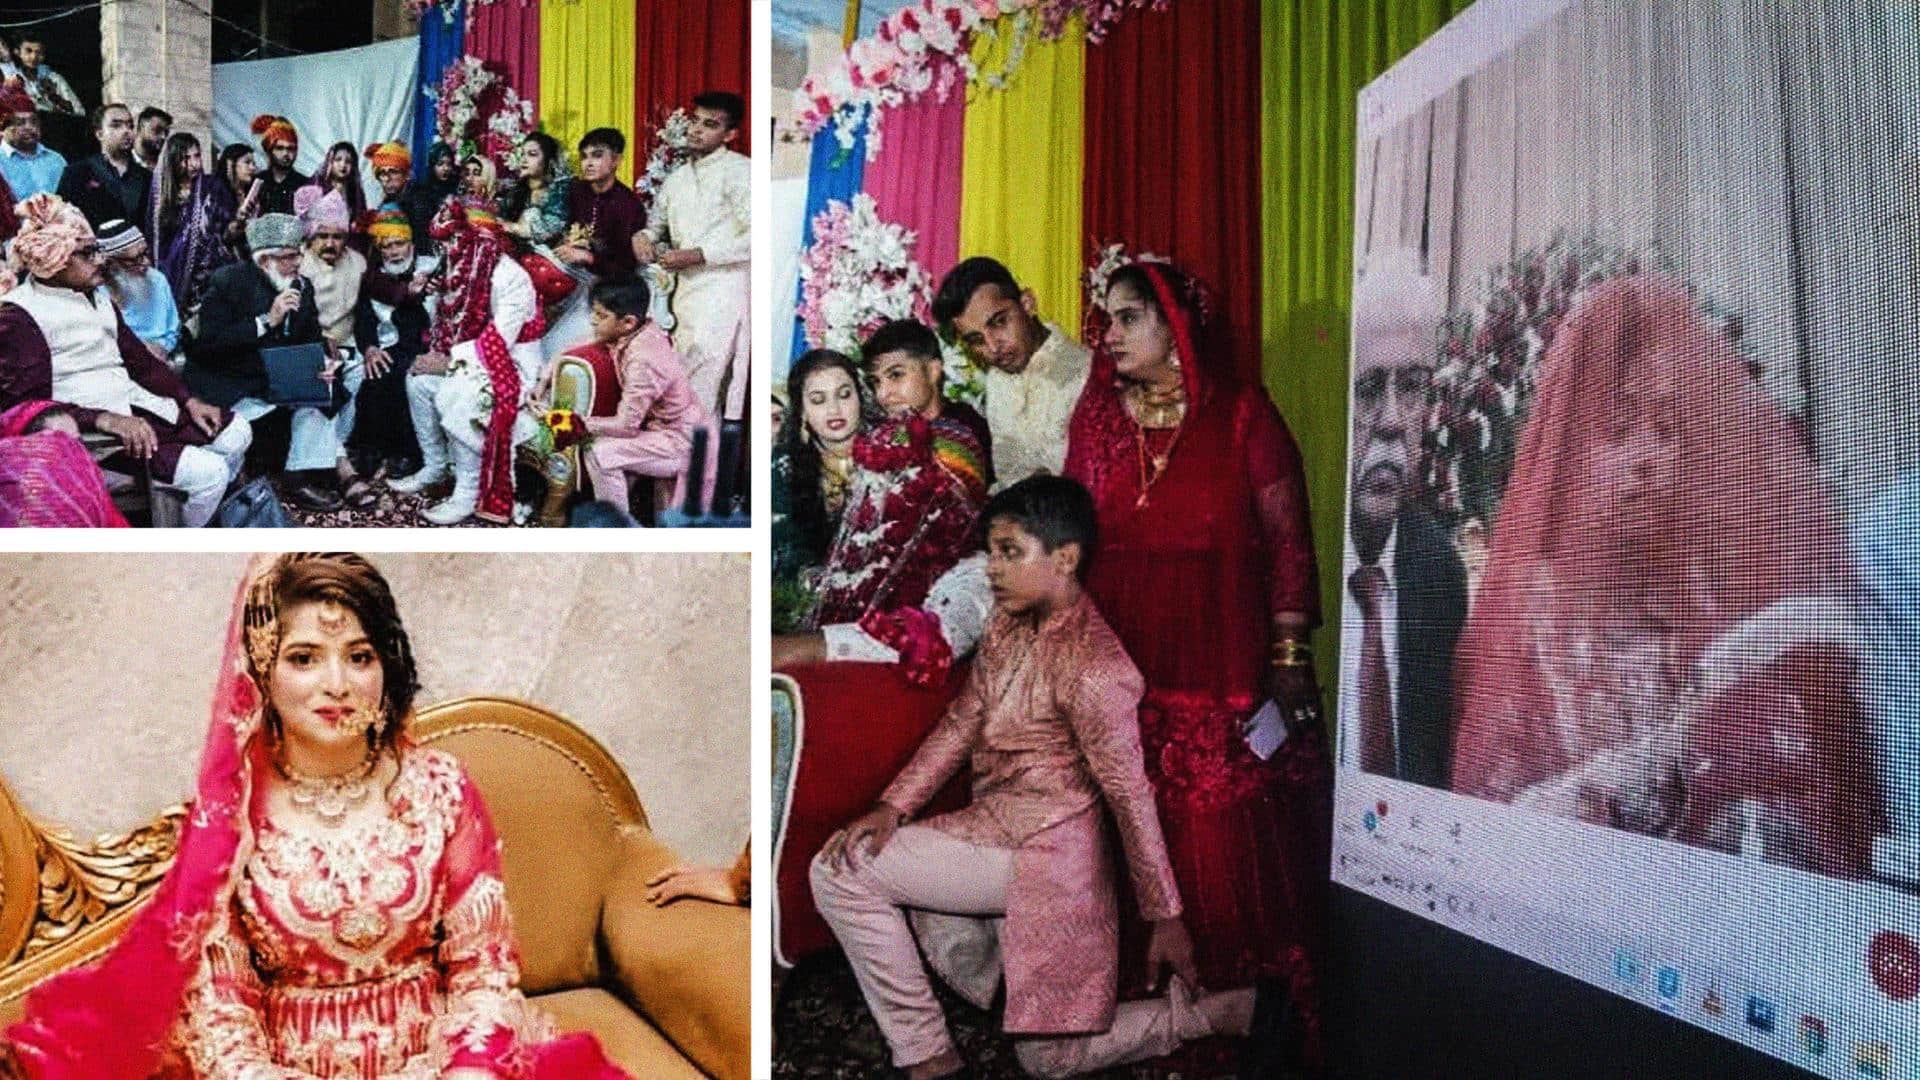 Another cross-border love story: Pakistani woman virtually marries Indian man